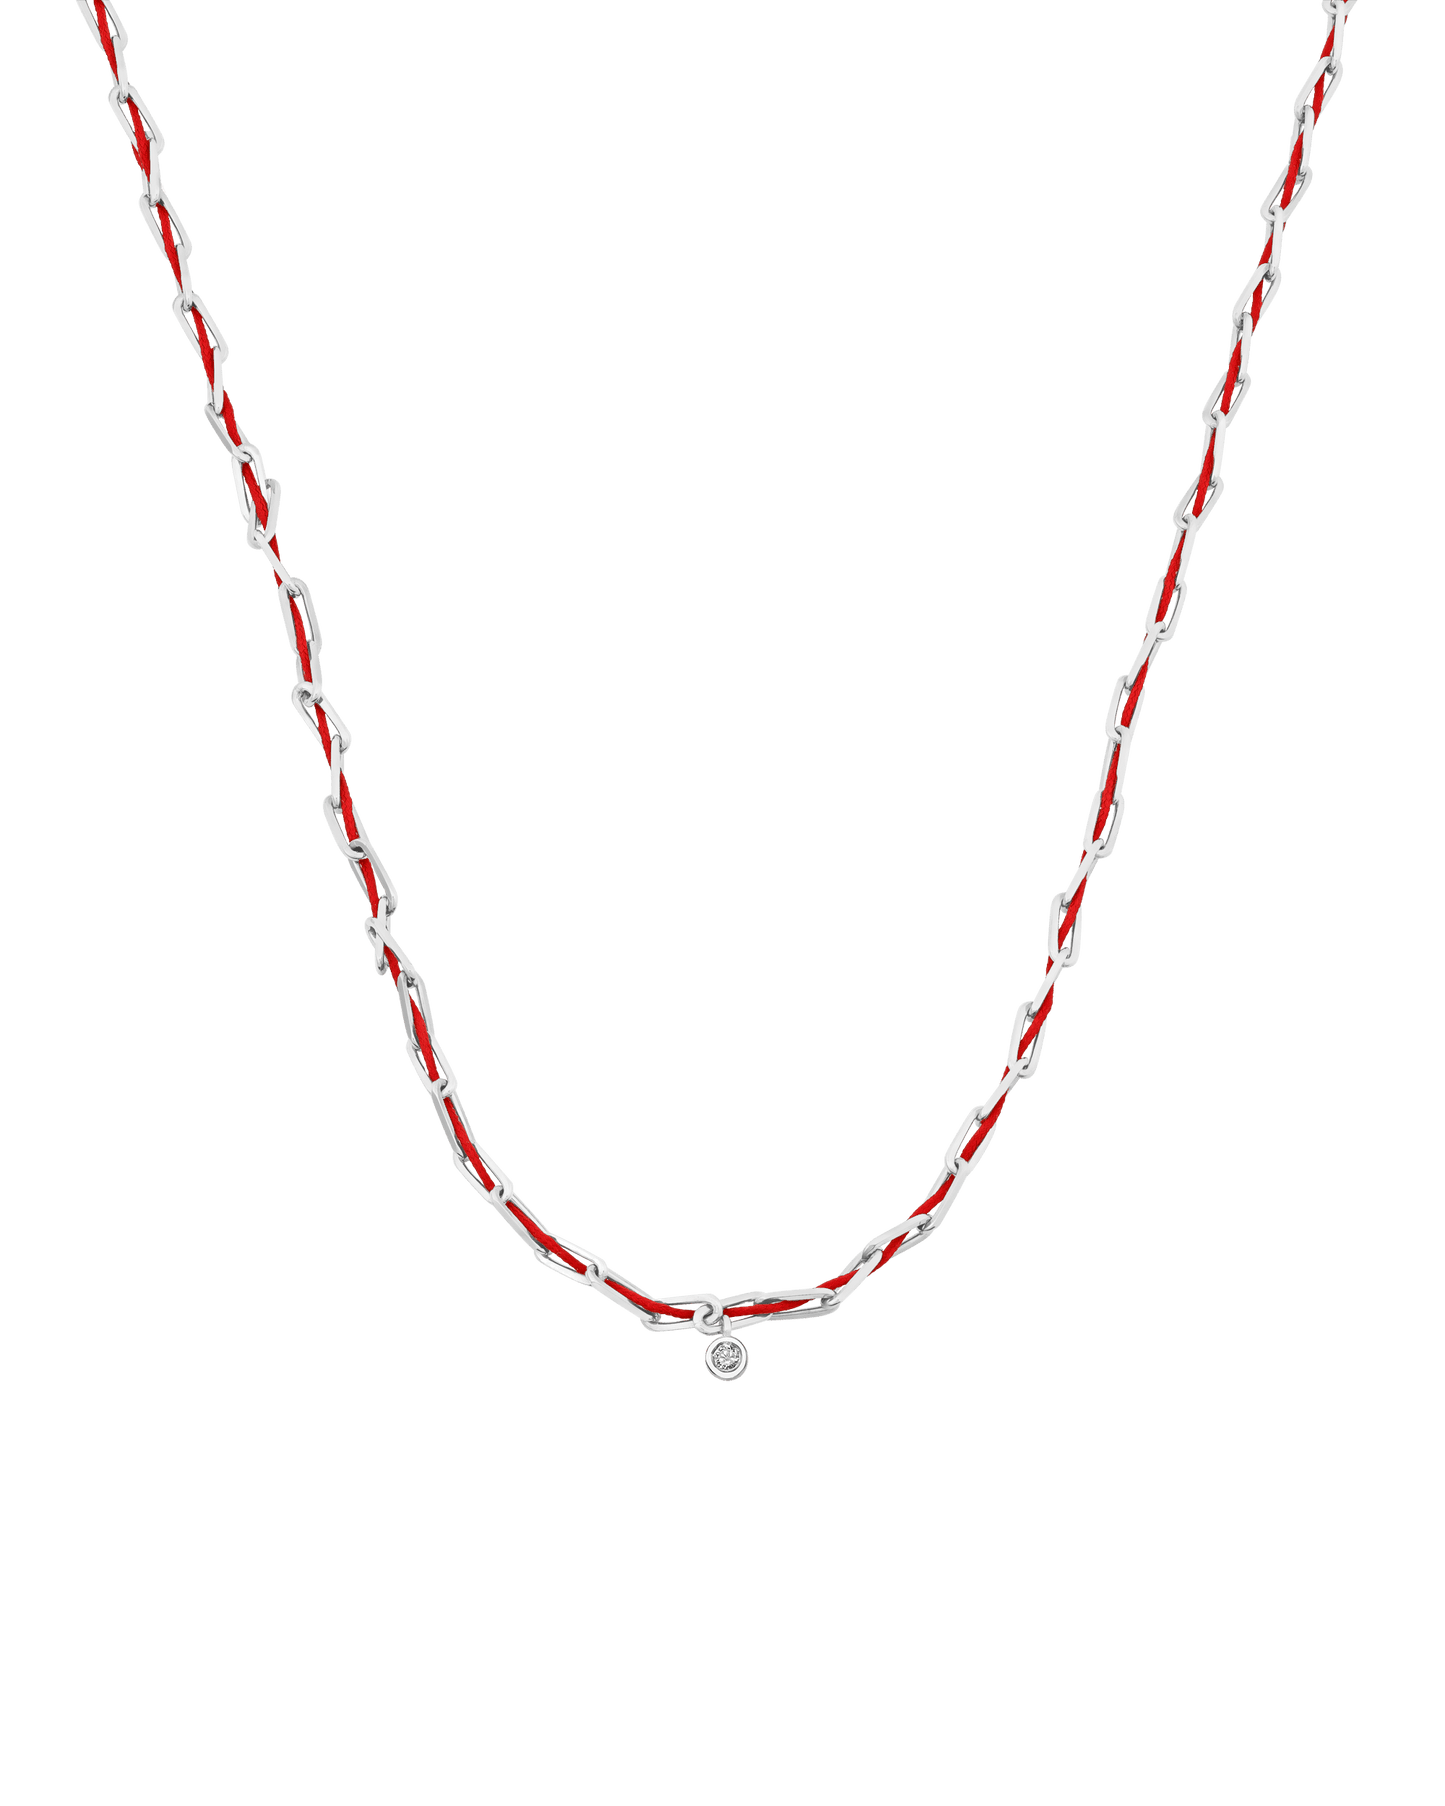 Twine Diamond Necklace - 925 Sterling Silver Necklaces magal-dev Red Medium: 0.05ct 16"